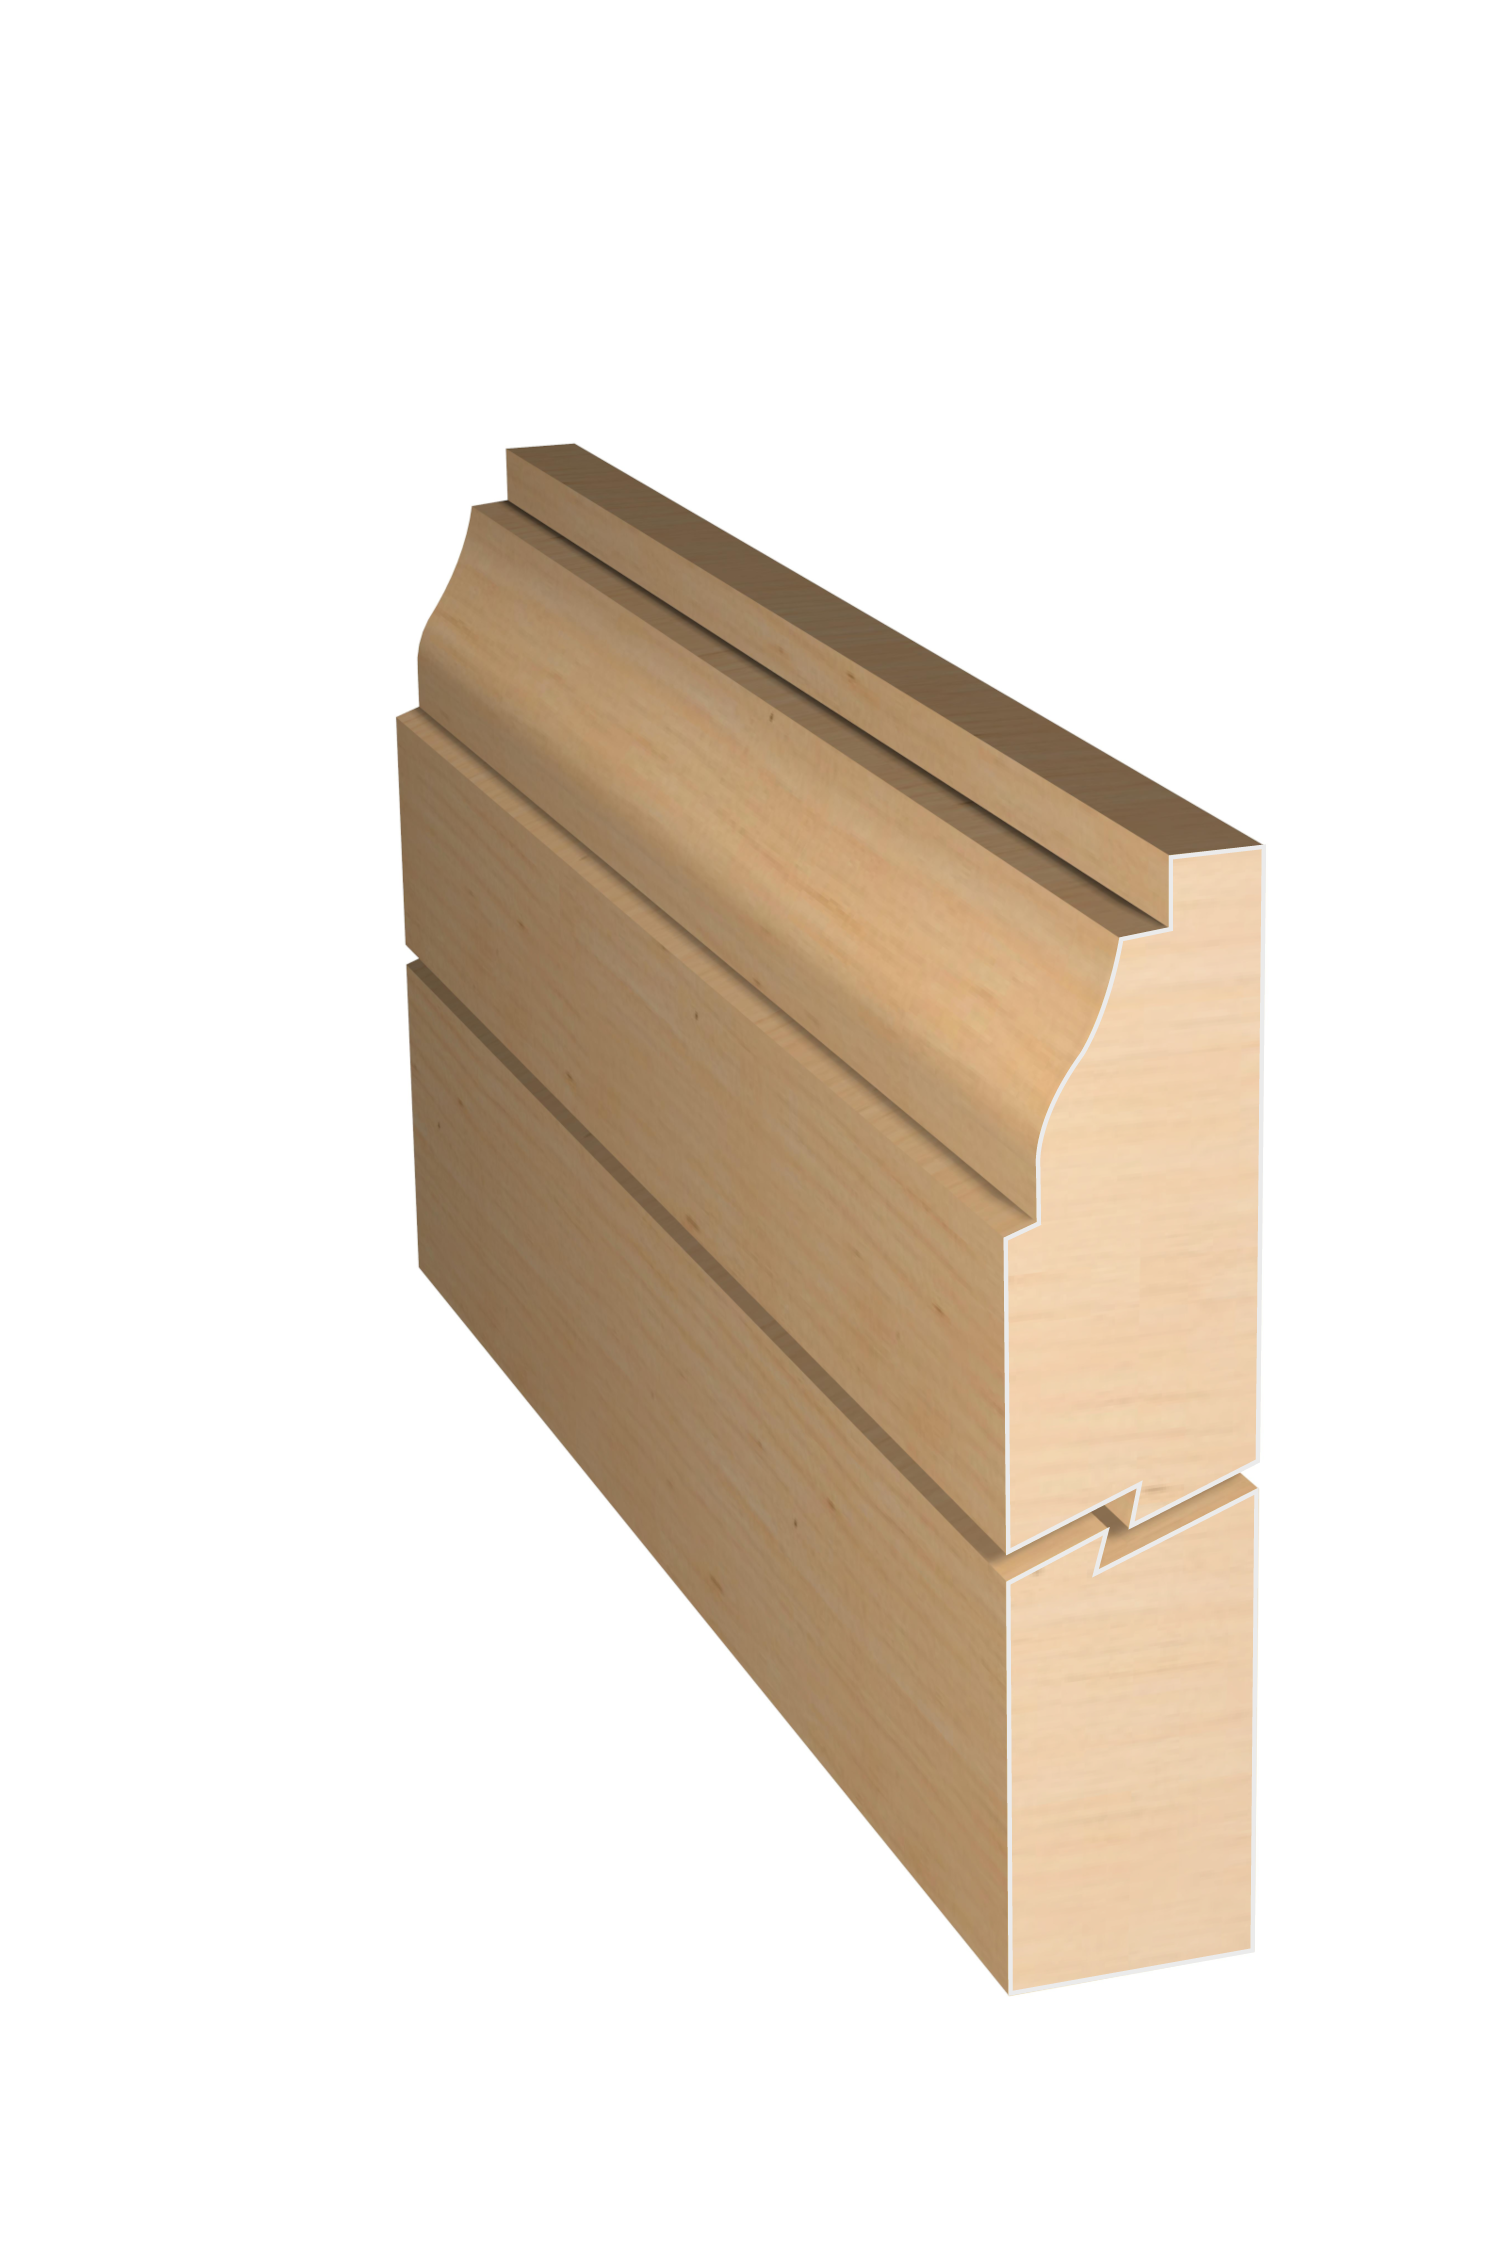 Three dimensional rendering of custom edge profile wood molding SKPL48 made by Public Lumber Company in Detroit.